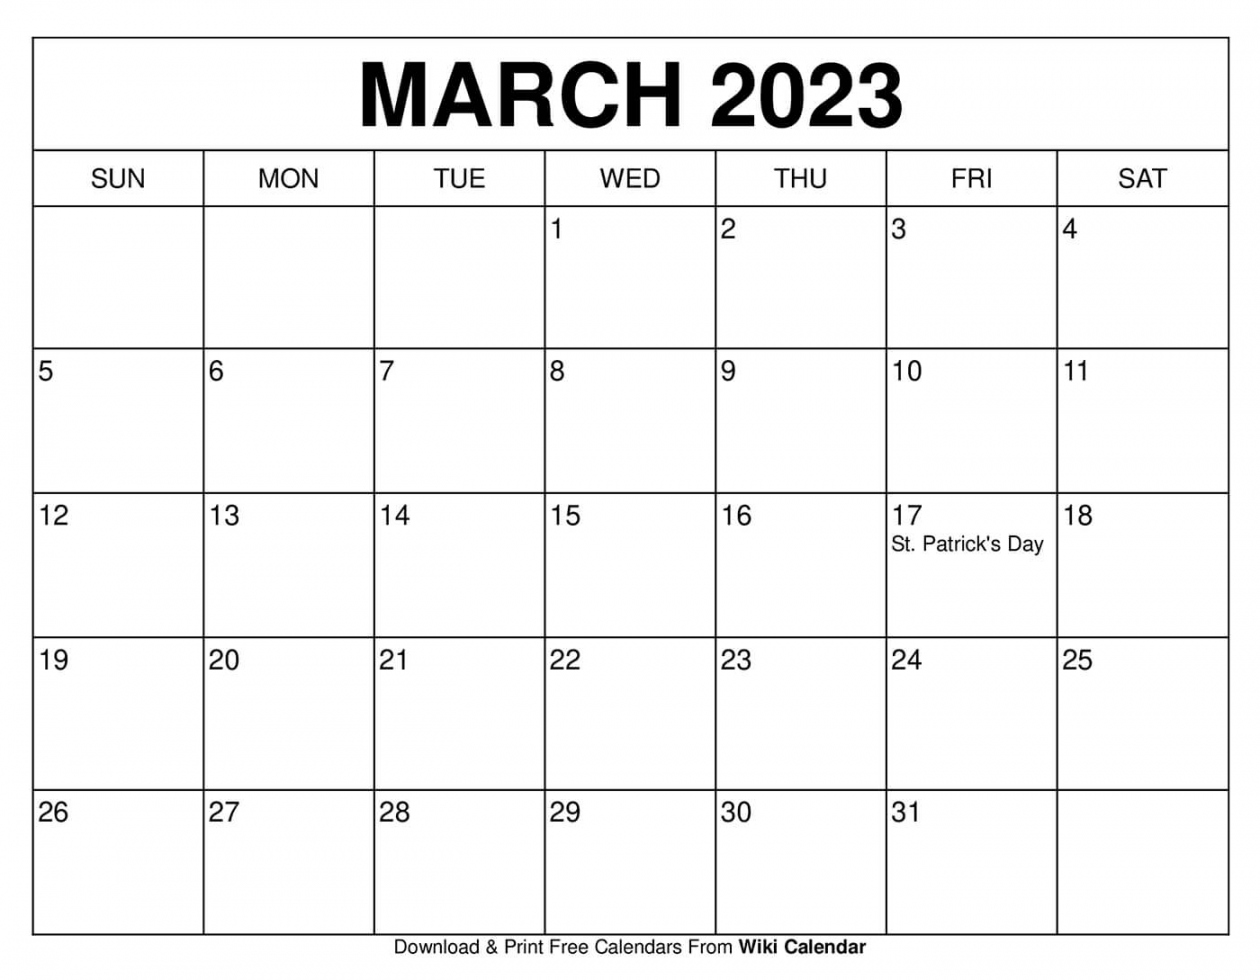 Free Printable March  Calendar Templates With Holidays - FREE Printables - Free Printable Calendar March 2023